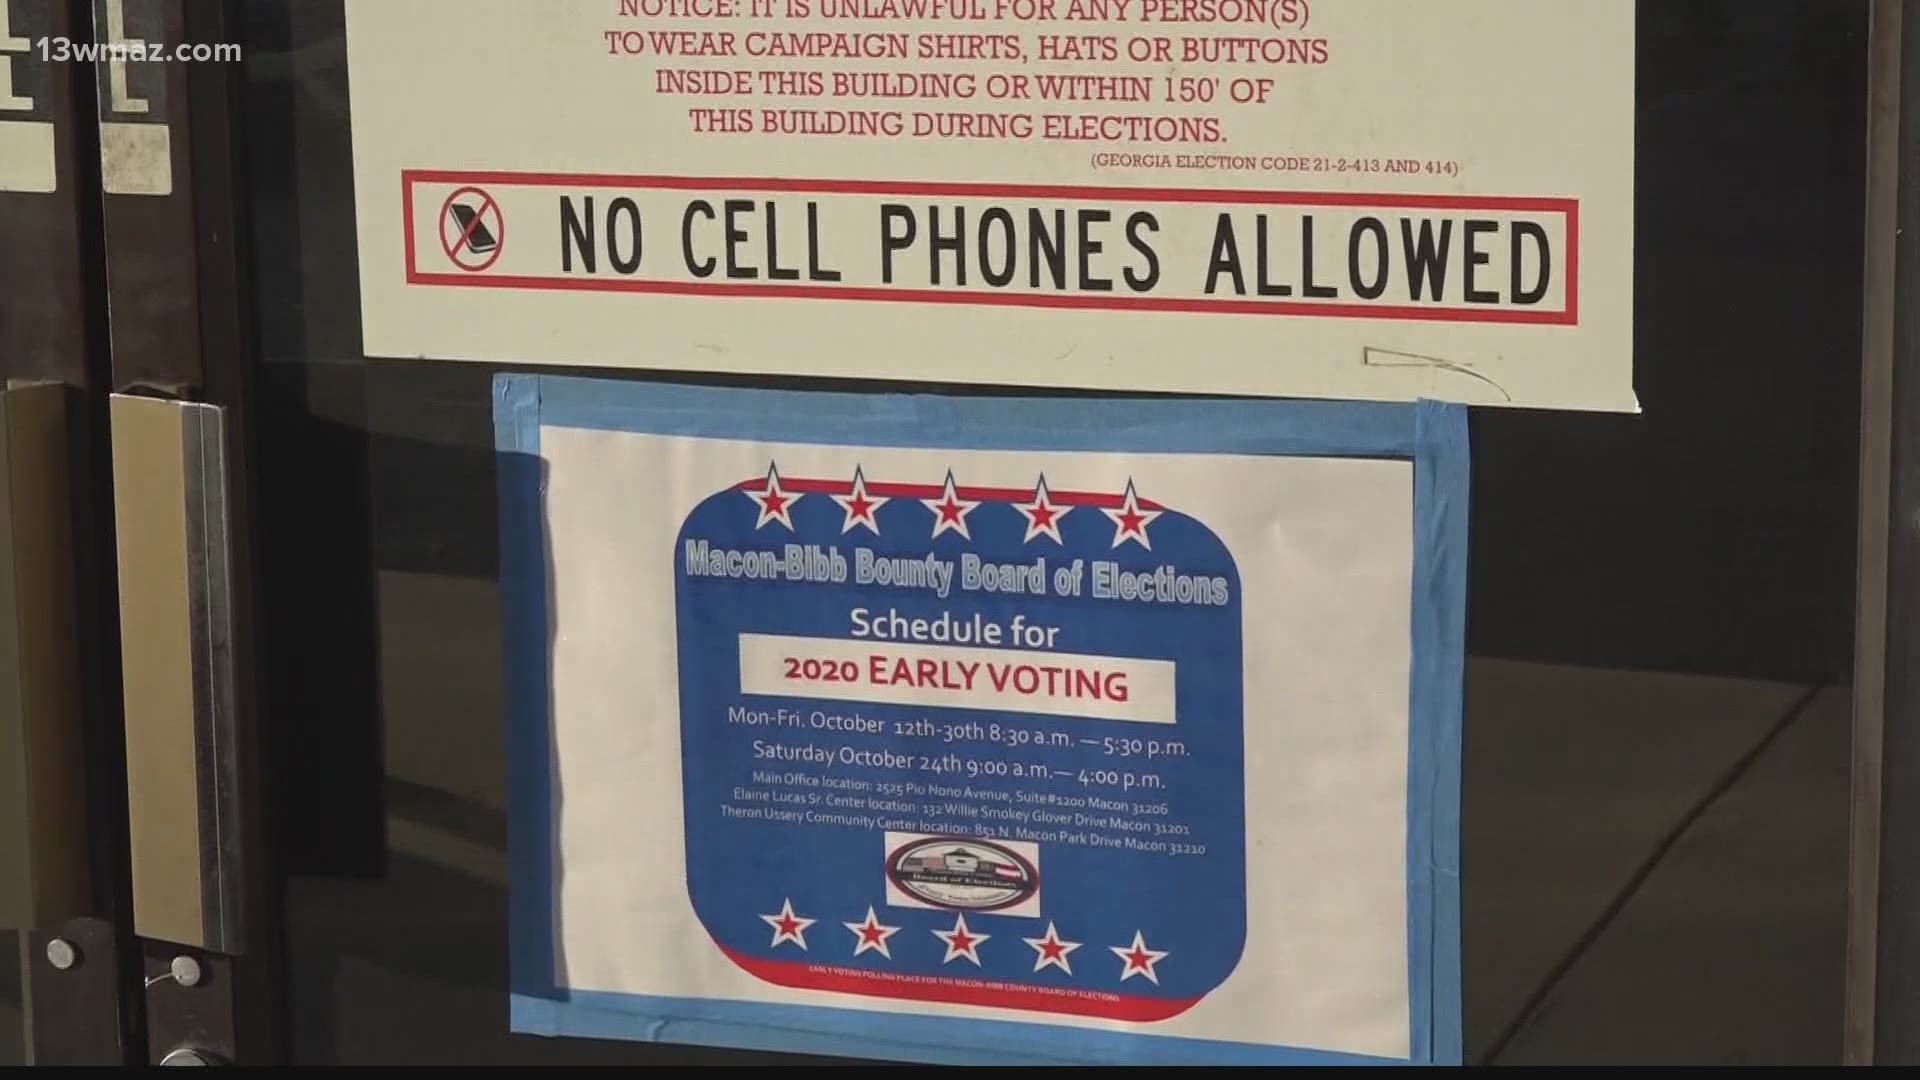 With only 1 day left of early voting and 5 days until the election, there's an important rule voters should keep in mind before casting their ballots.